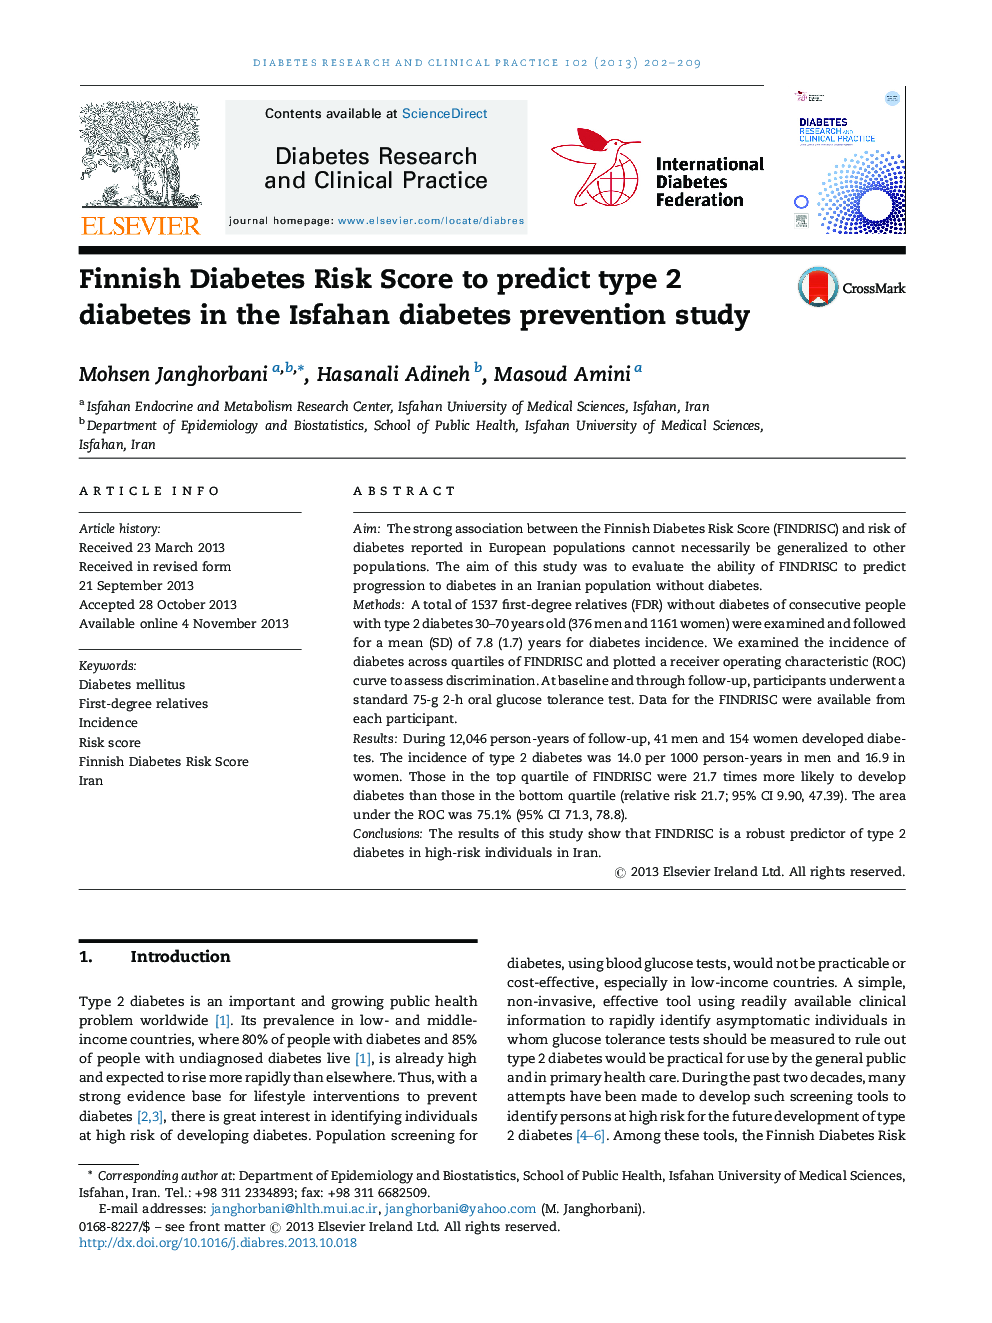 Finnish Diabetes Risk Score to predict type 2 diabetes in the Isfahan diabetes prevention study